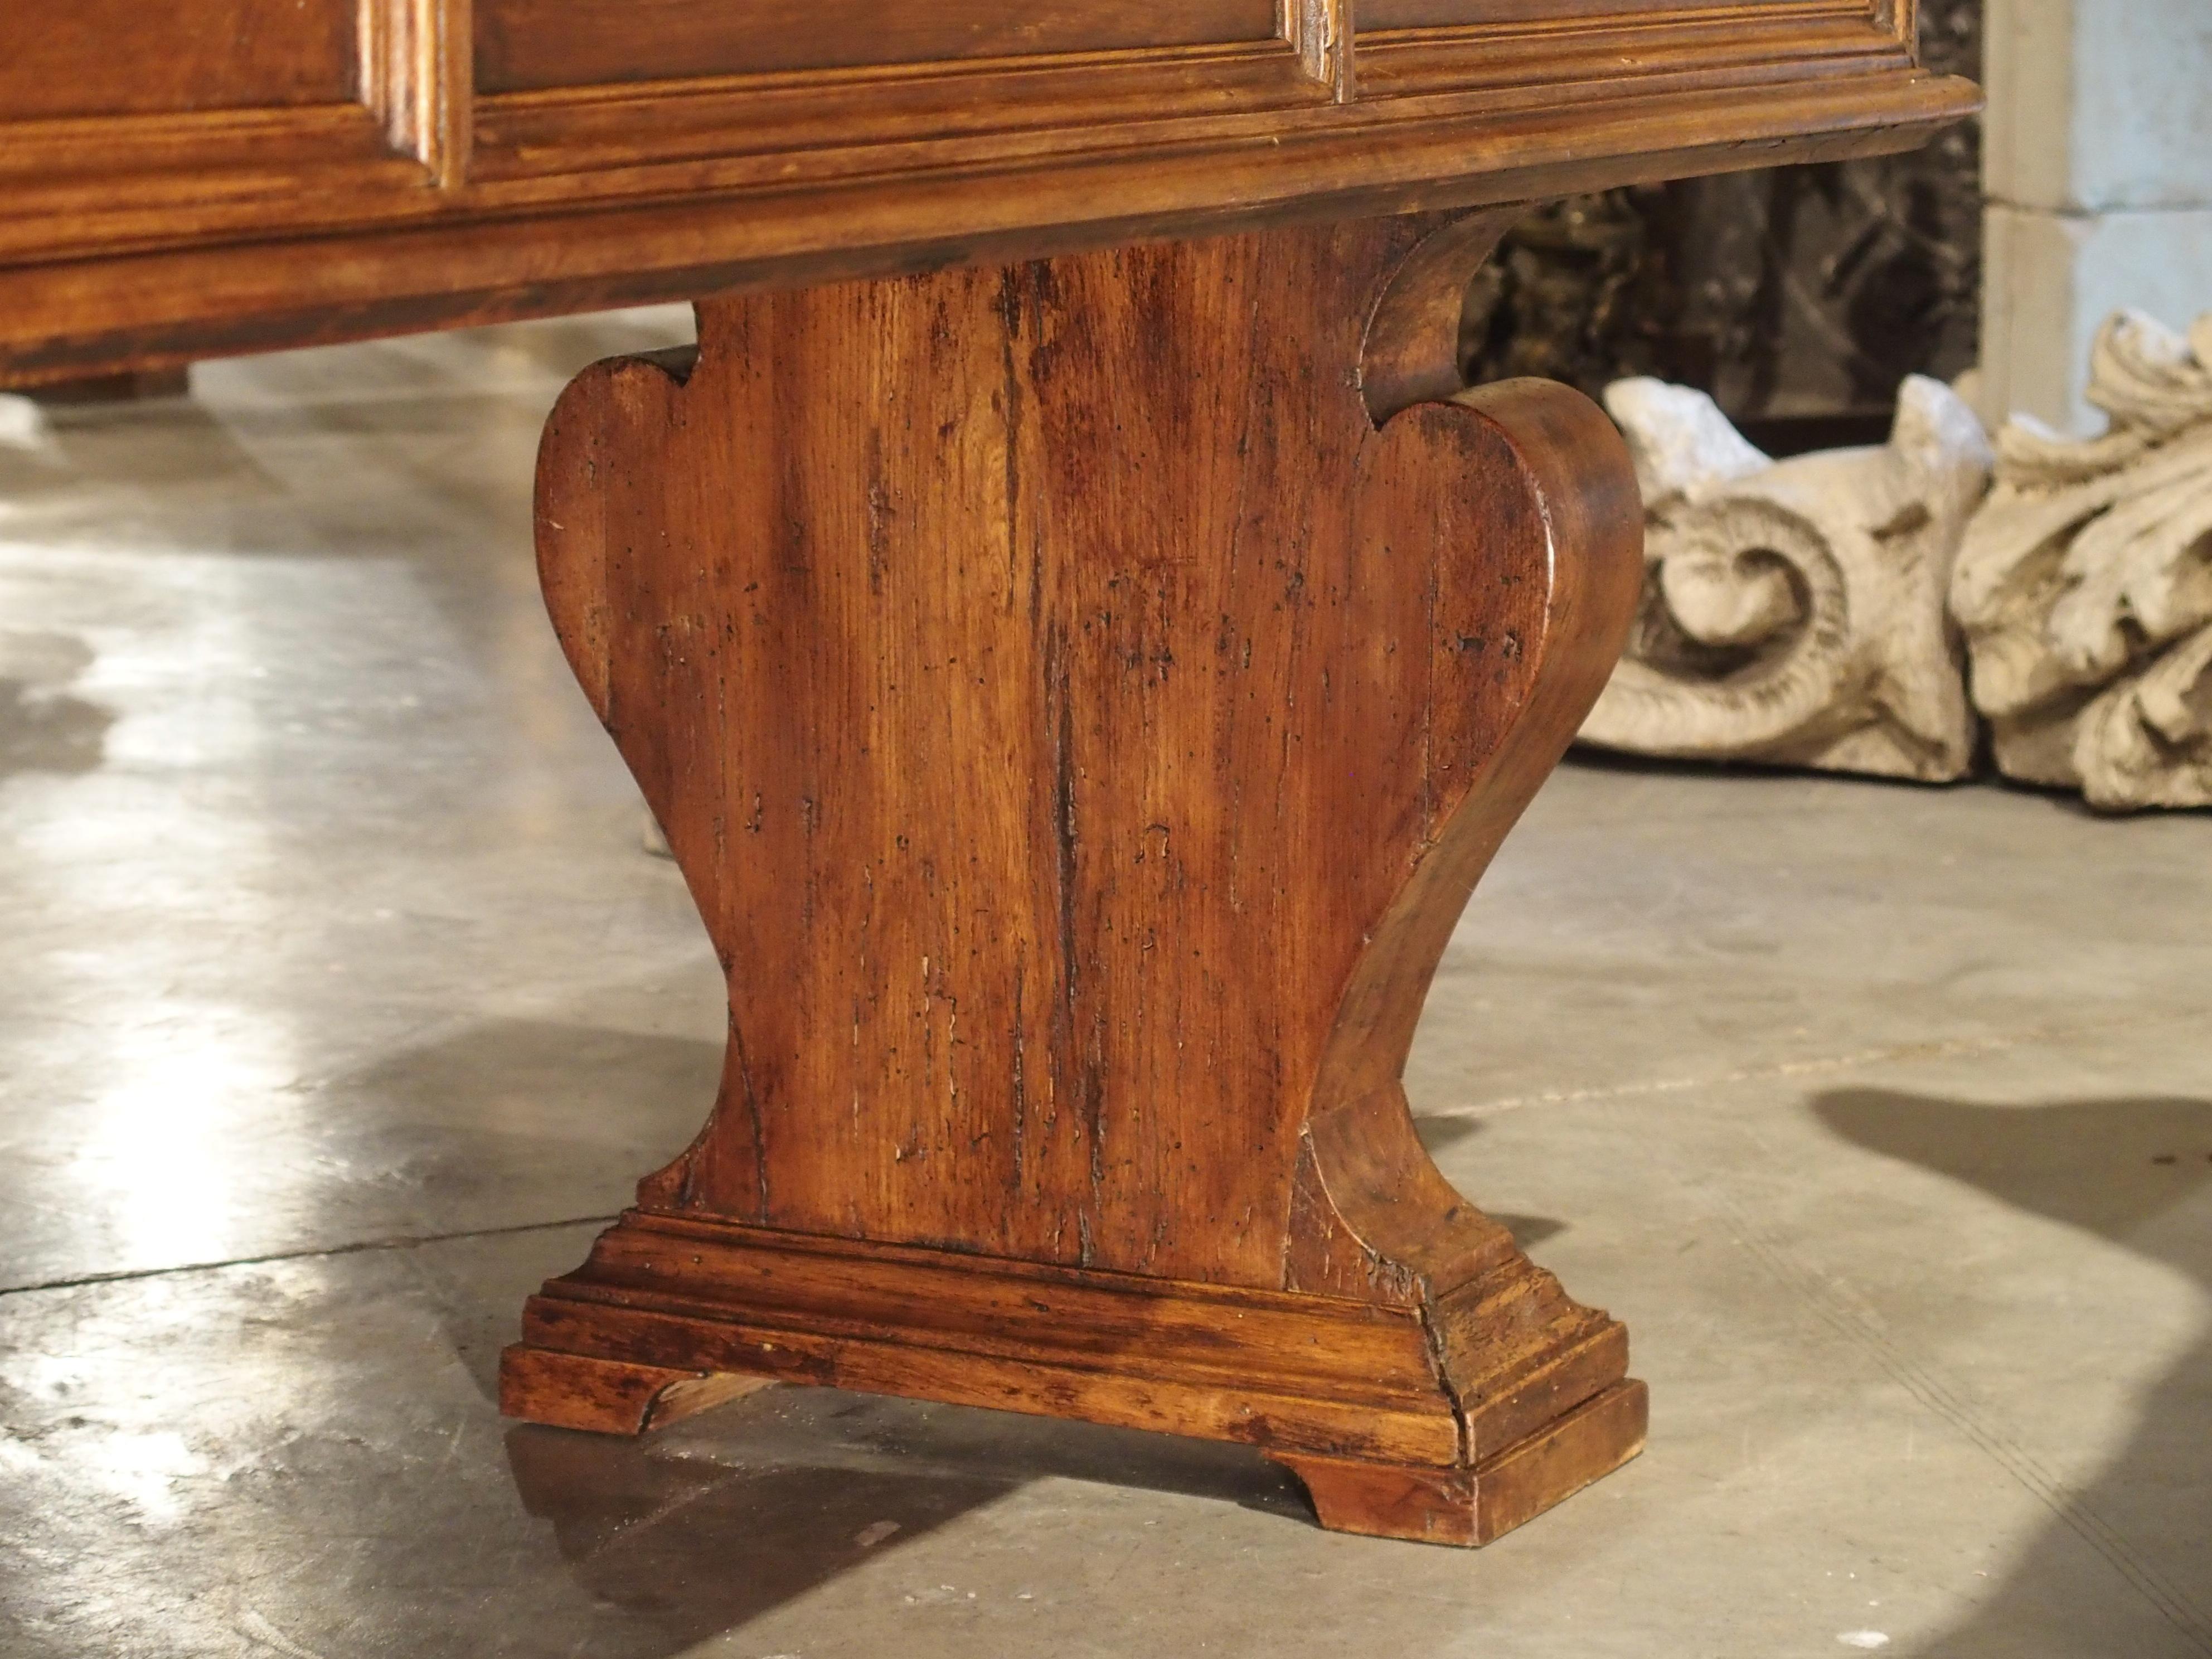 19th Century Walnut Wood Refectory Table from Italy 5